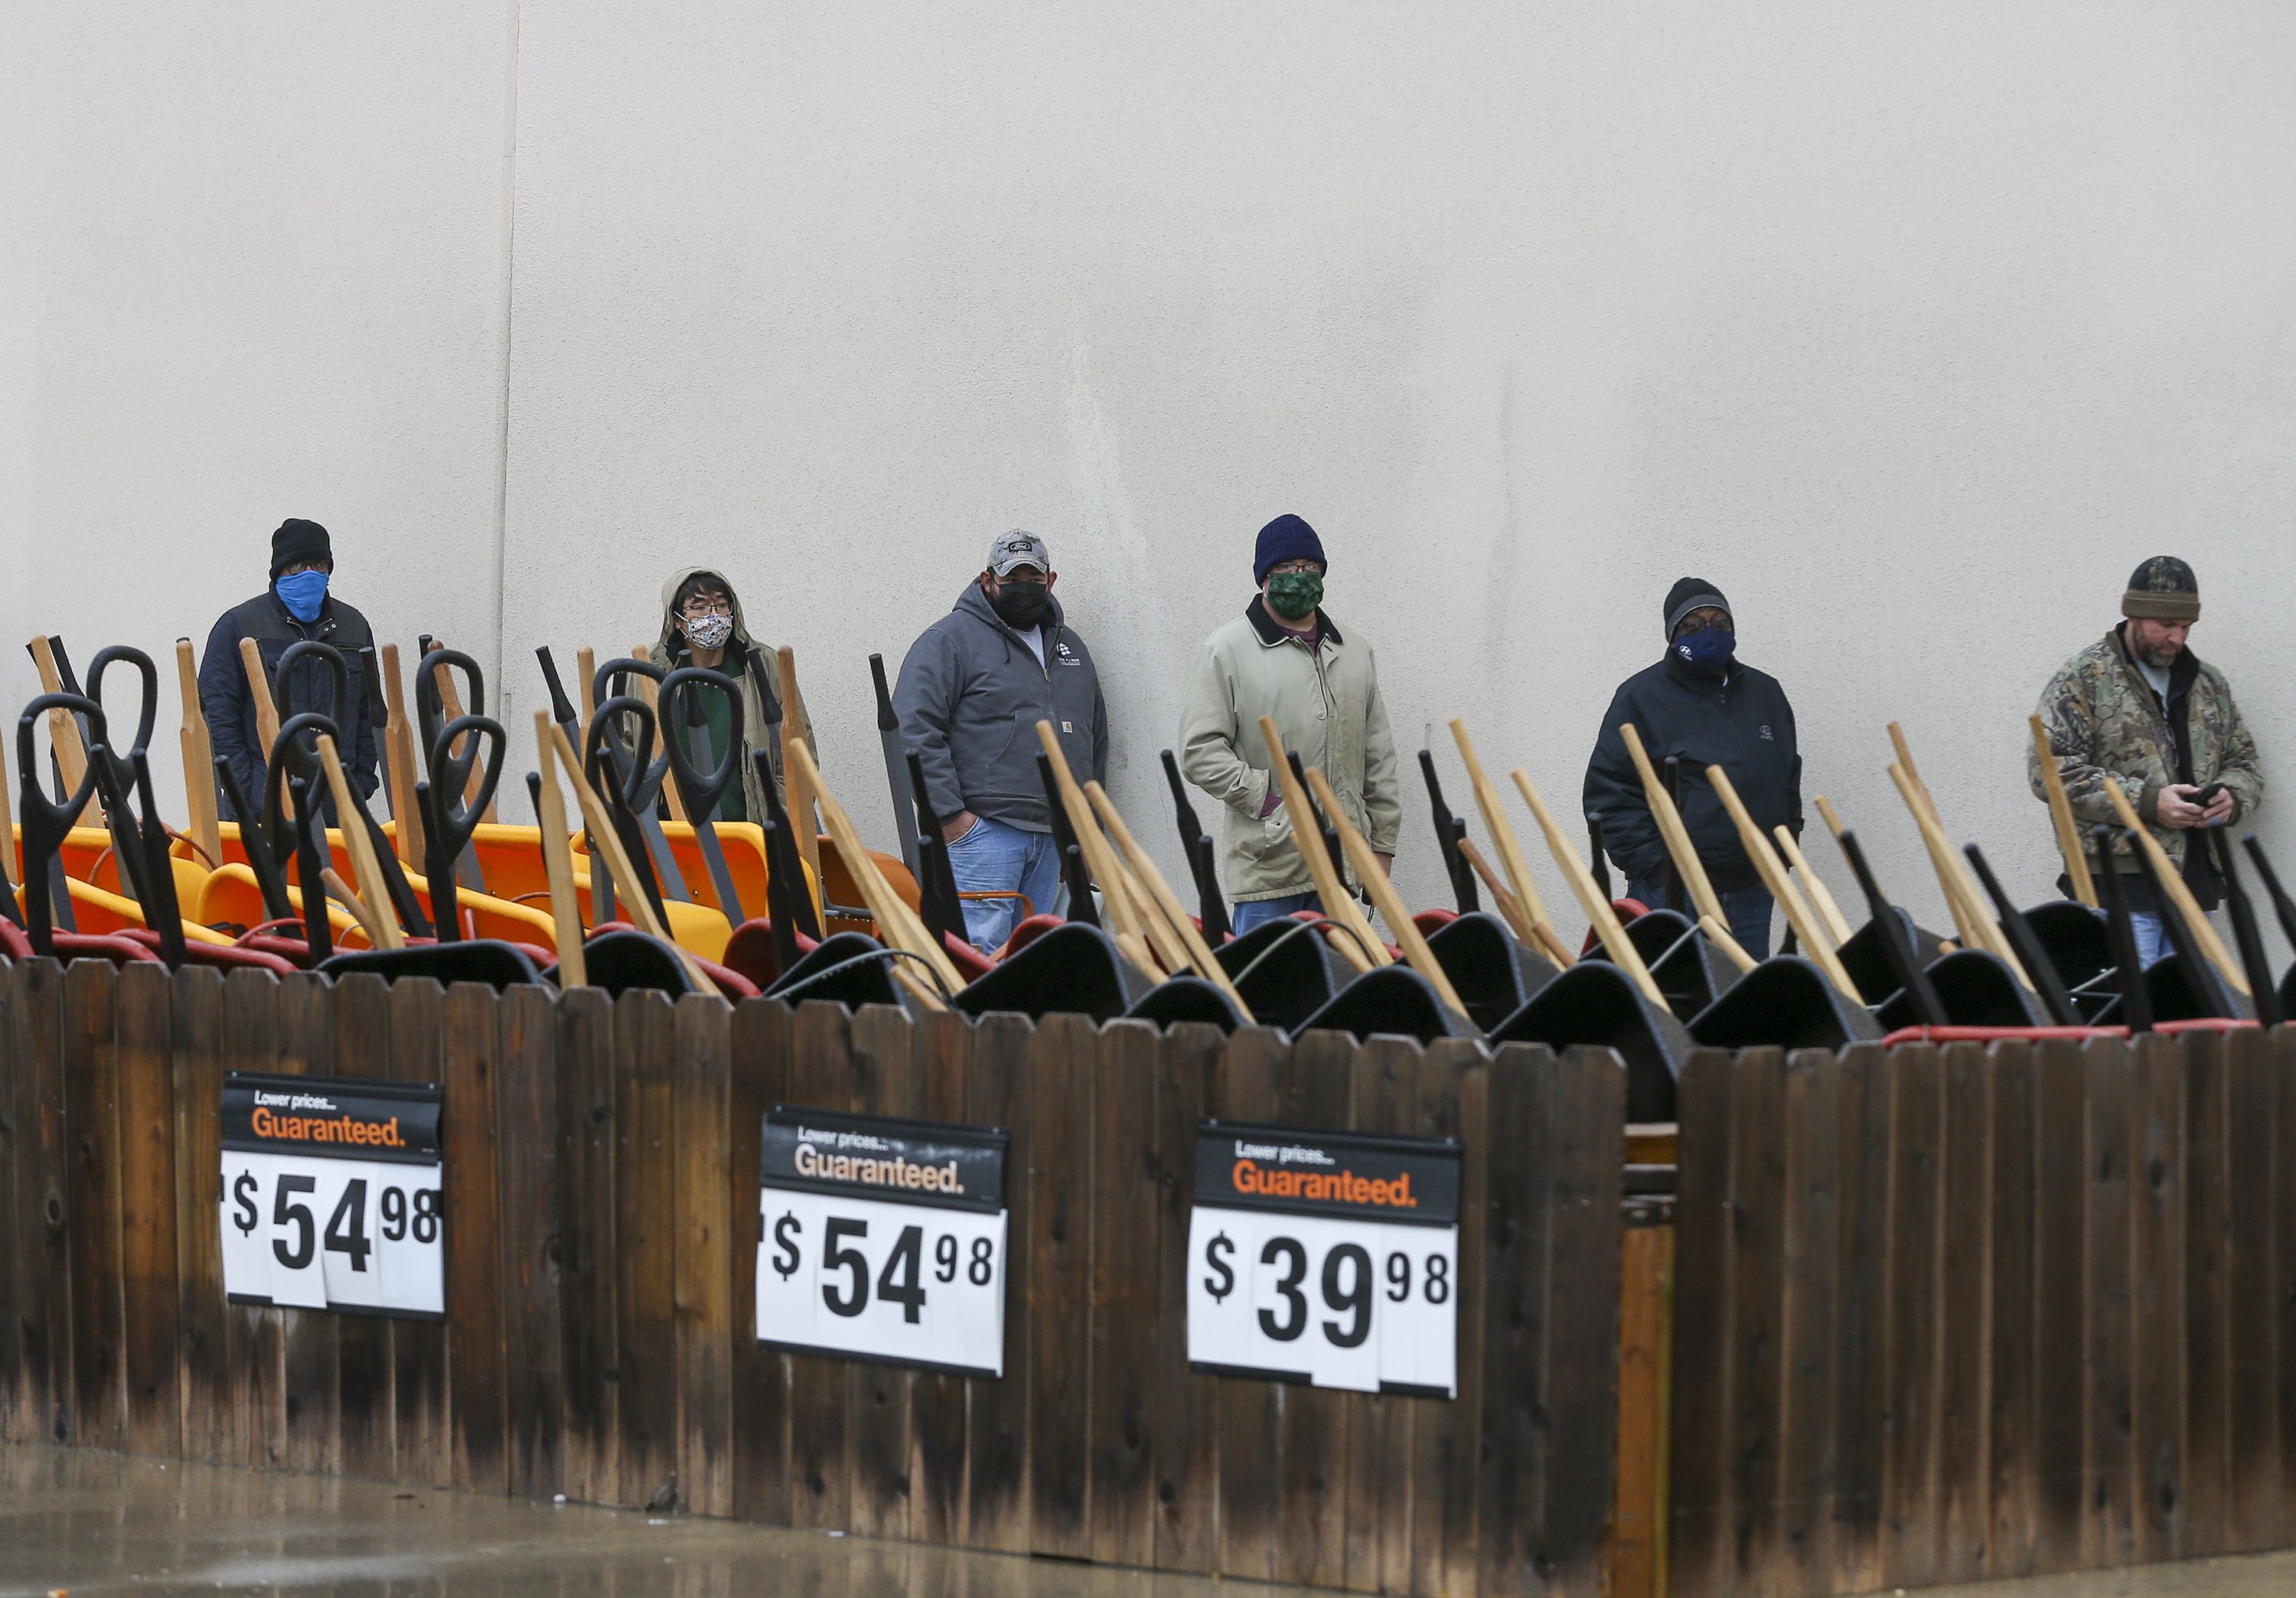 Customers wait outside at a Home Depot in Pearland, Texas to enter the store to buy supplies on February 17